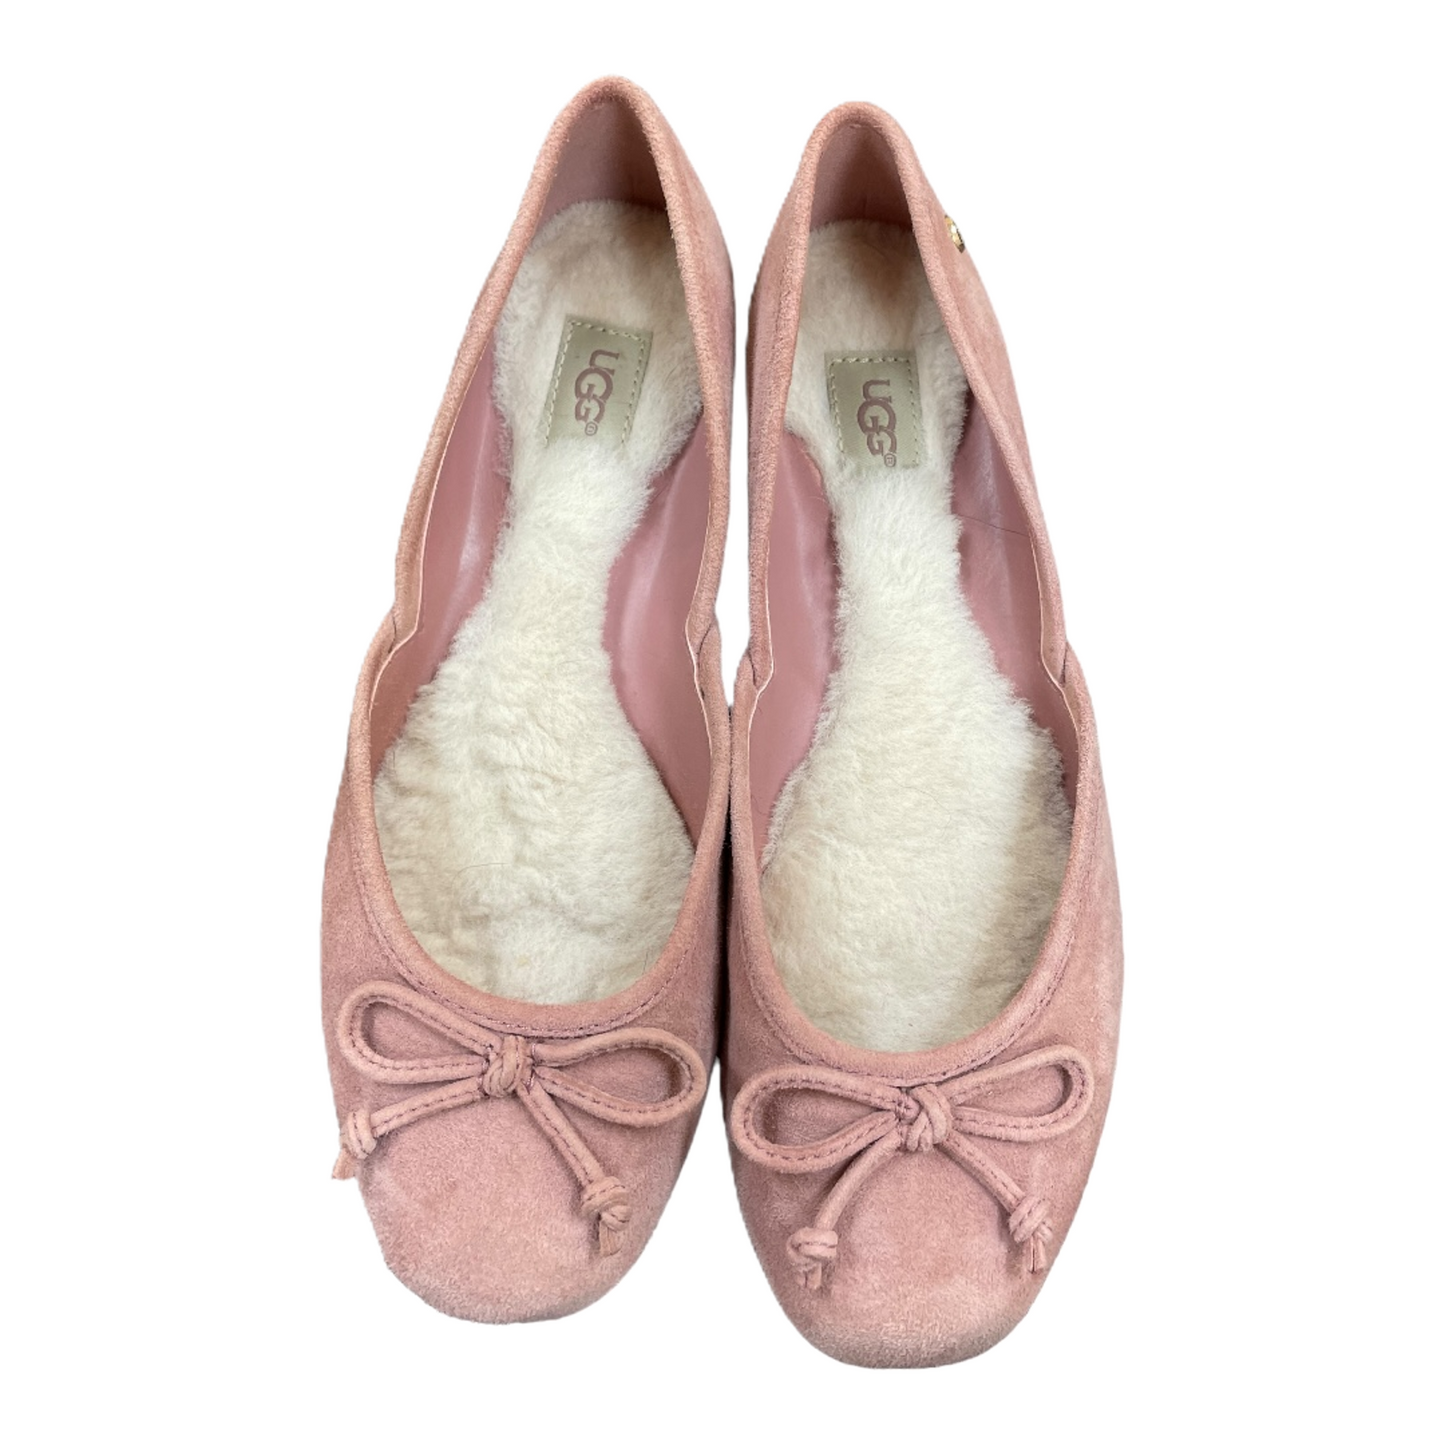 Pink Shoes Flats By Ugg, Size: 7